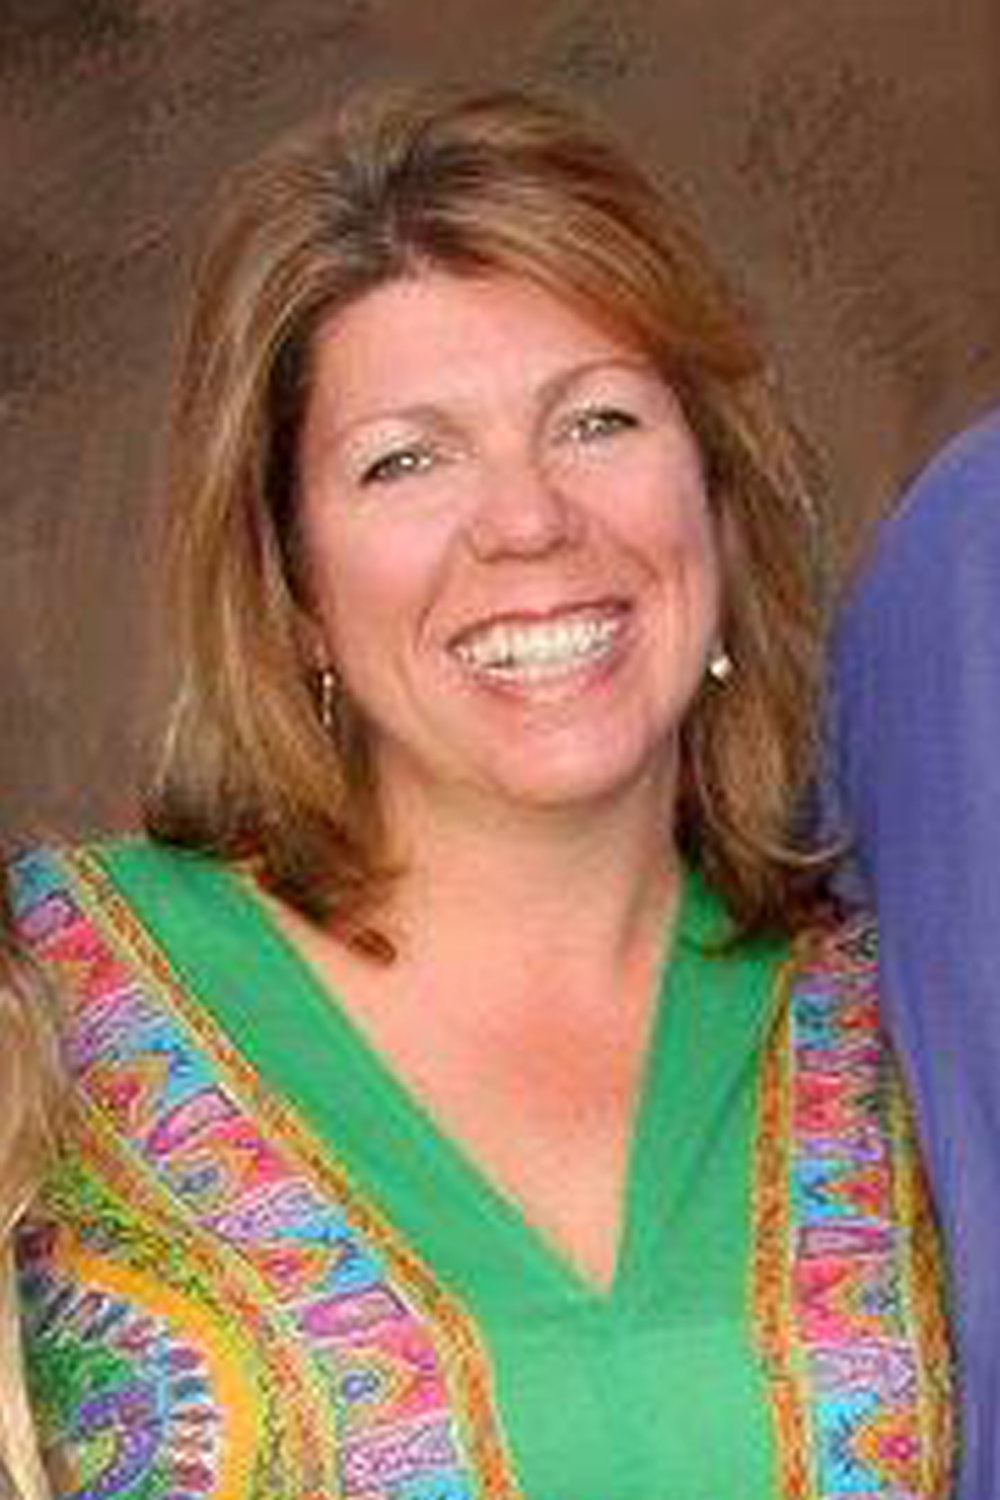 Heather Hanson, Lynbrook incumbent 

Age: 51
Residency: 16 years 
Family: Husband, Kevin; daughter, Elizabeth; and son, Kevin 
Education: Bachelor’s in English from the University of Maine 
Career: Fundraiser
Activities: PTA member, member of the Parents and Friends of Music Booster Club, the Special Education PTA and the Lynbrook Track Booster Club, founding member of the Lynbrook Excellence in Education Foundation.